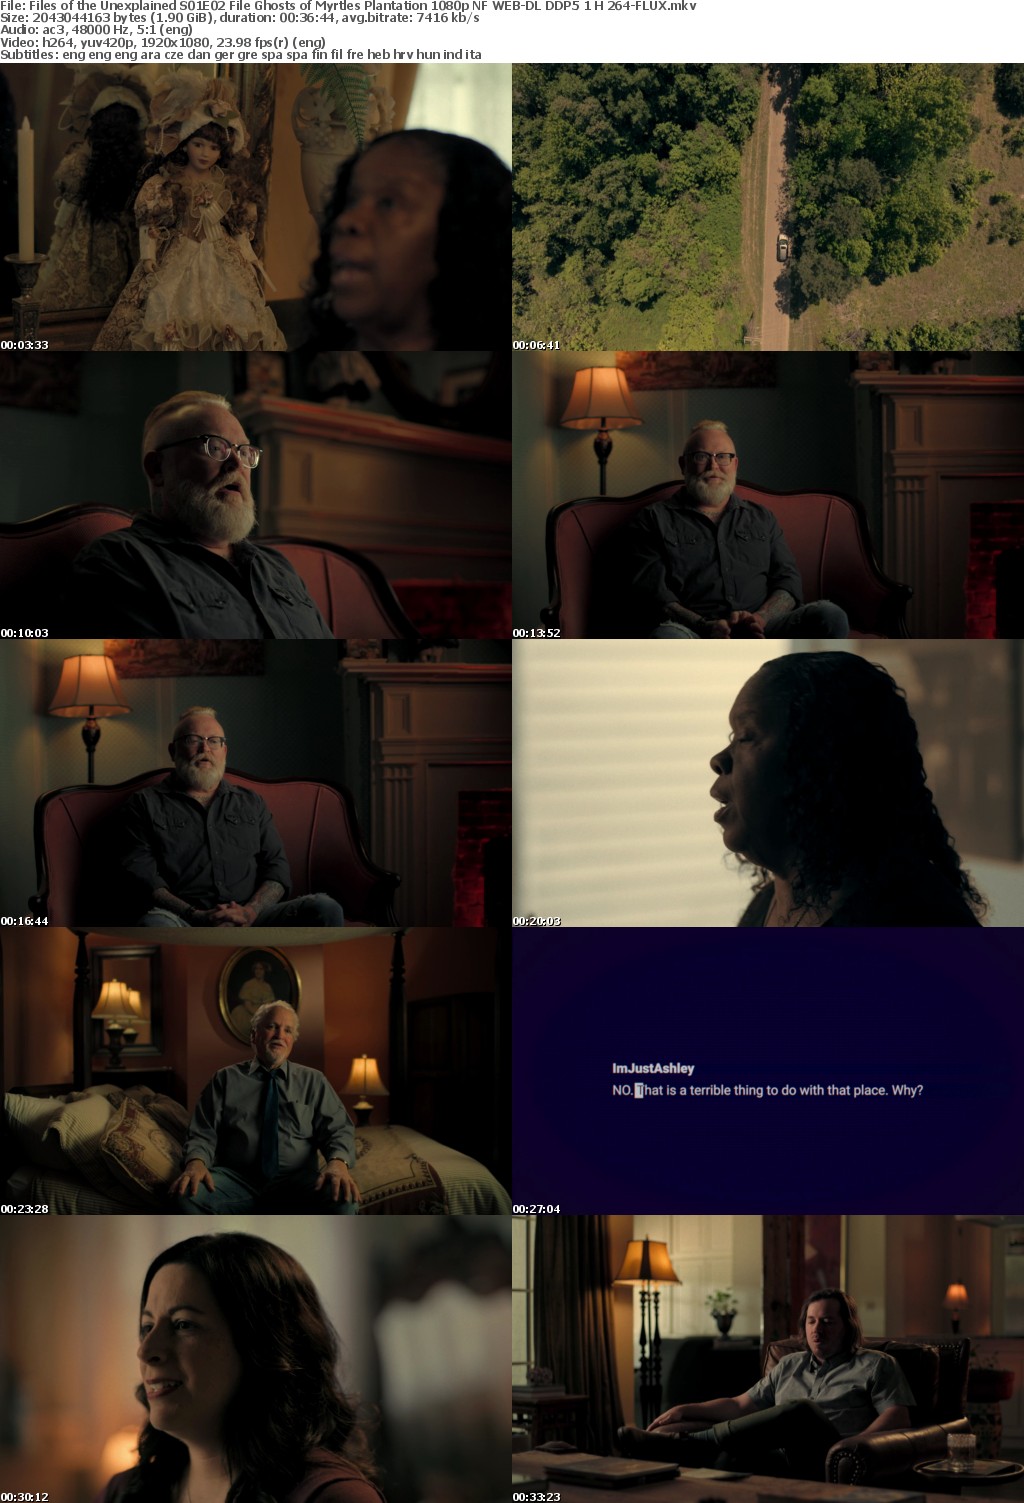 Files of the Unexplained S01E02 File Ghosts of Myrtles Plantation 1080p NF WEB-DL DDP5 1 H 264-FLUX